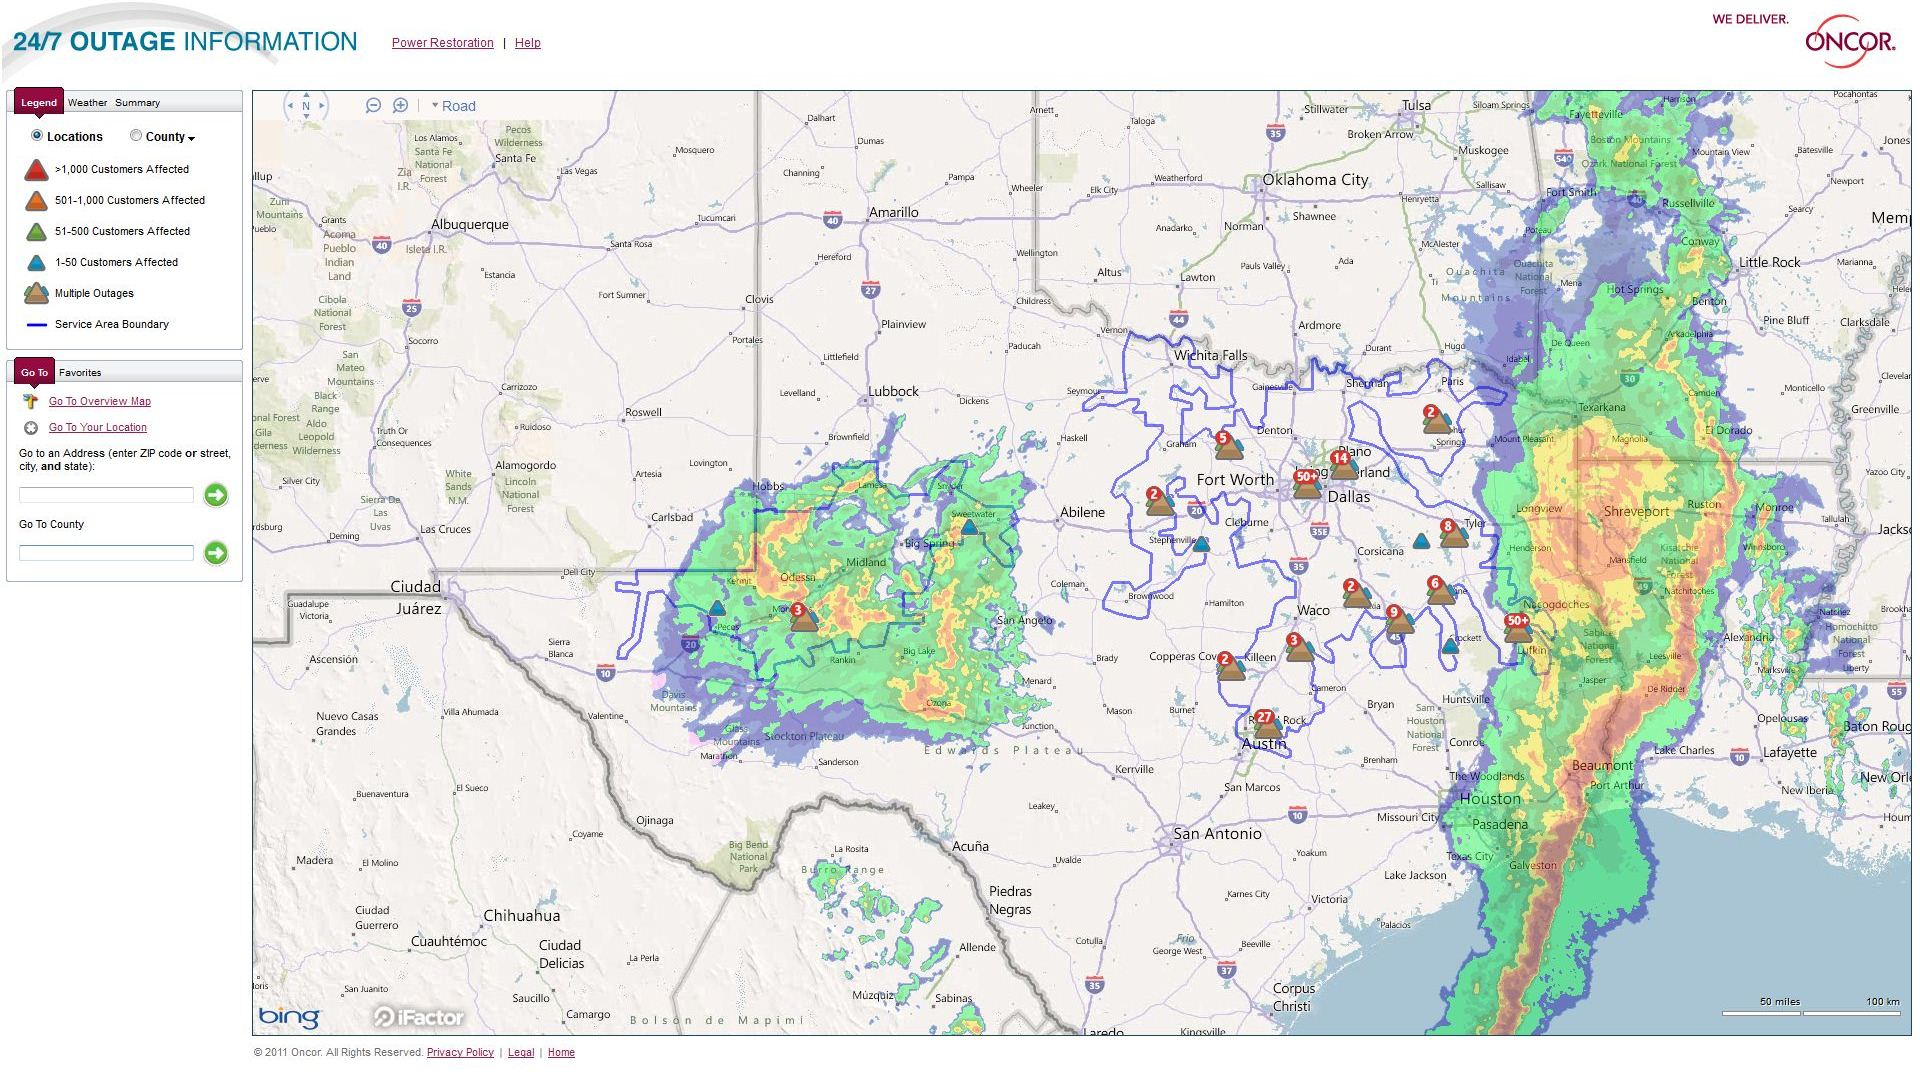 English What Does The “Cause” Field In The Outage Information Box Mean? - Power Outage Map Texas